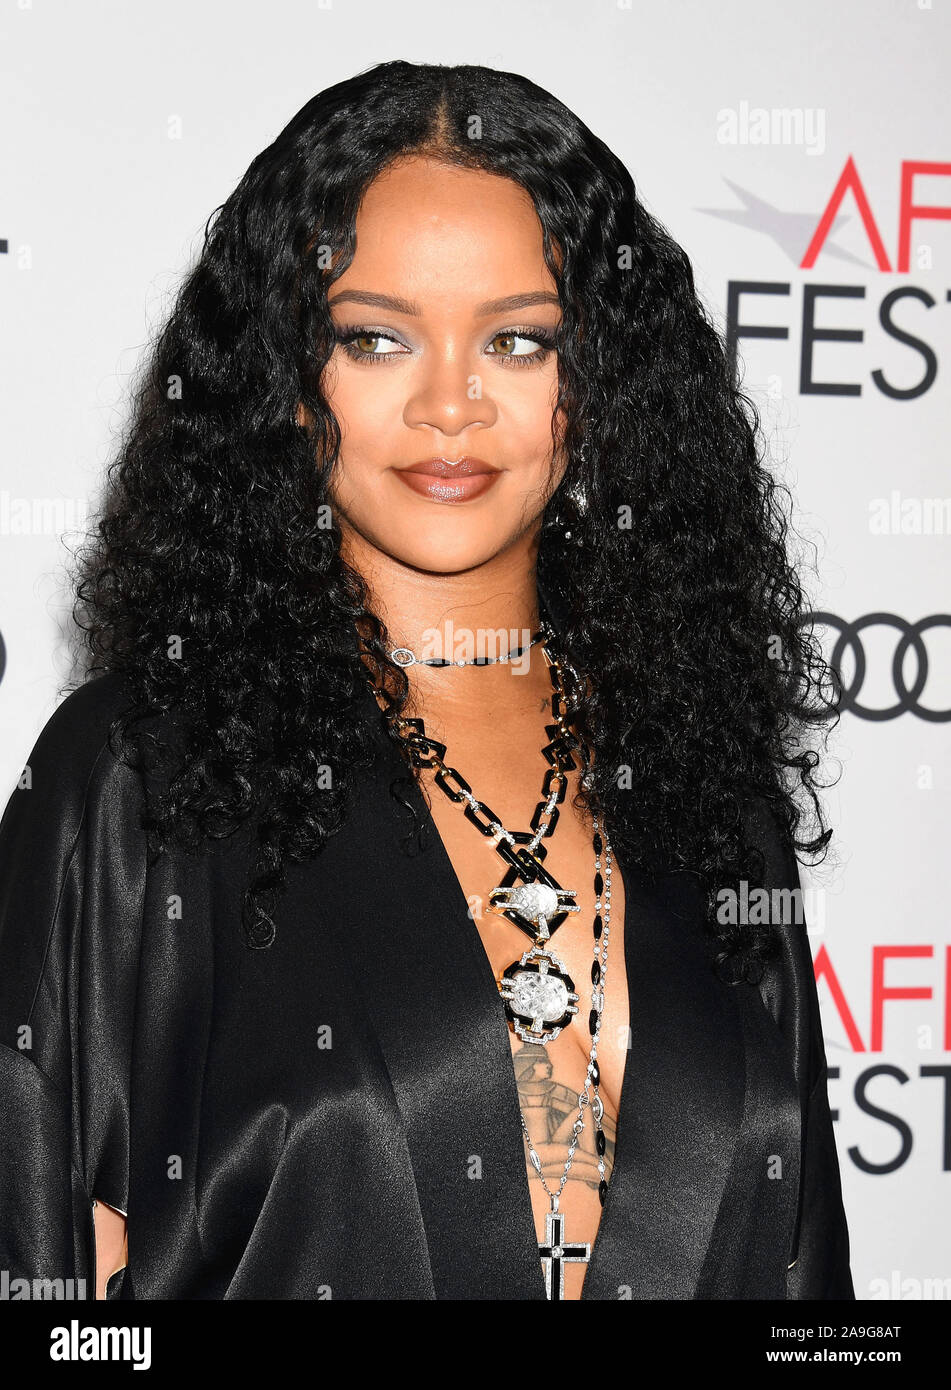 HOLLYWOOD, CA - NOVEMBER 14: Rihanna attends the 'Queen & Slim' Premiere at AFI FEST 2019 presented by Audi at the TCL Chinese Theatre on November 14, 2019 in Hollywood, California. Stock Photo